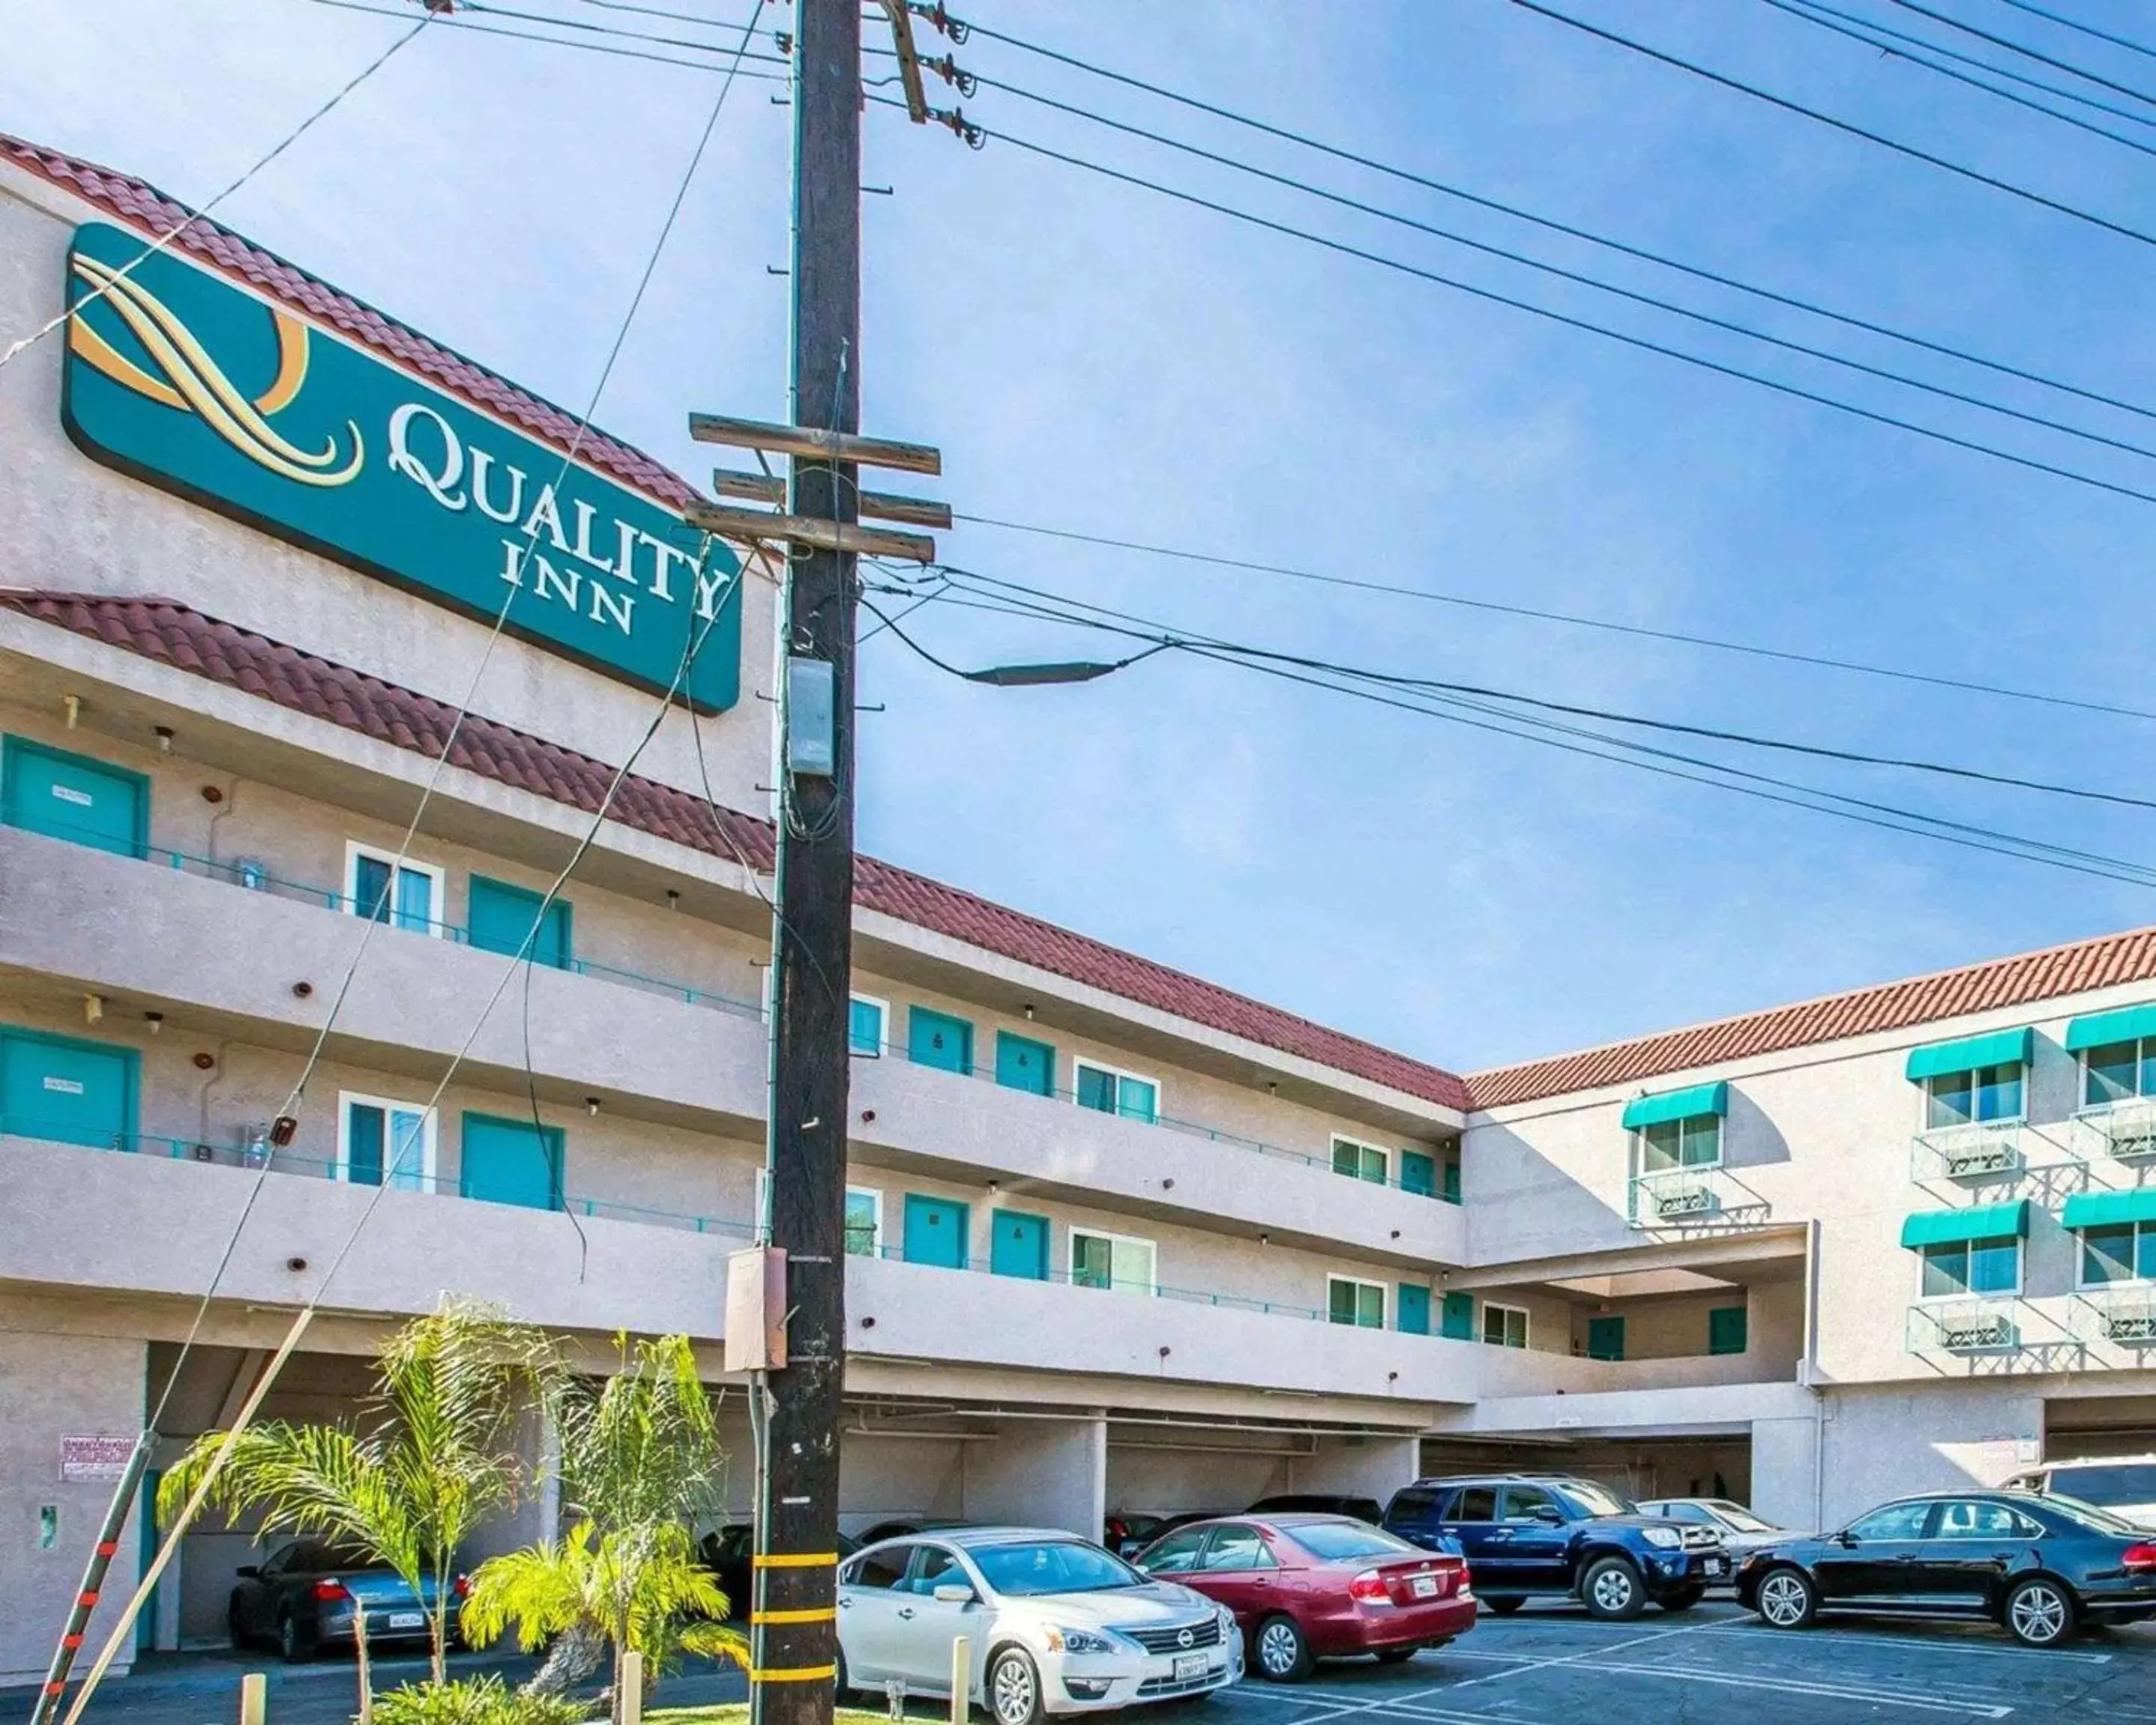 Property Building in Quality Inn Burbank Airport